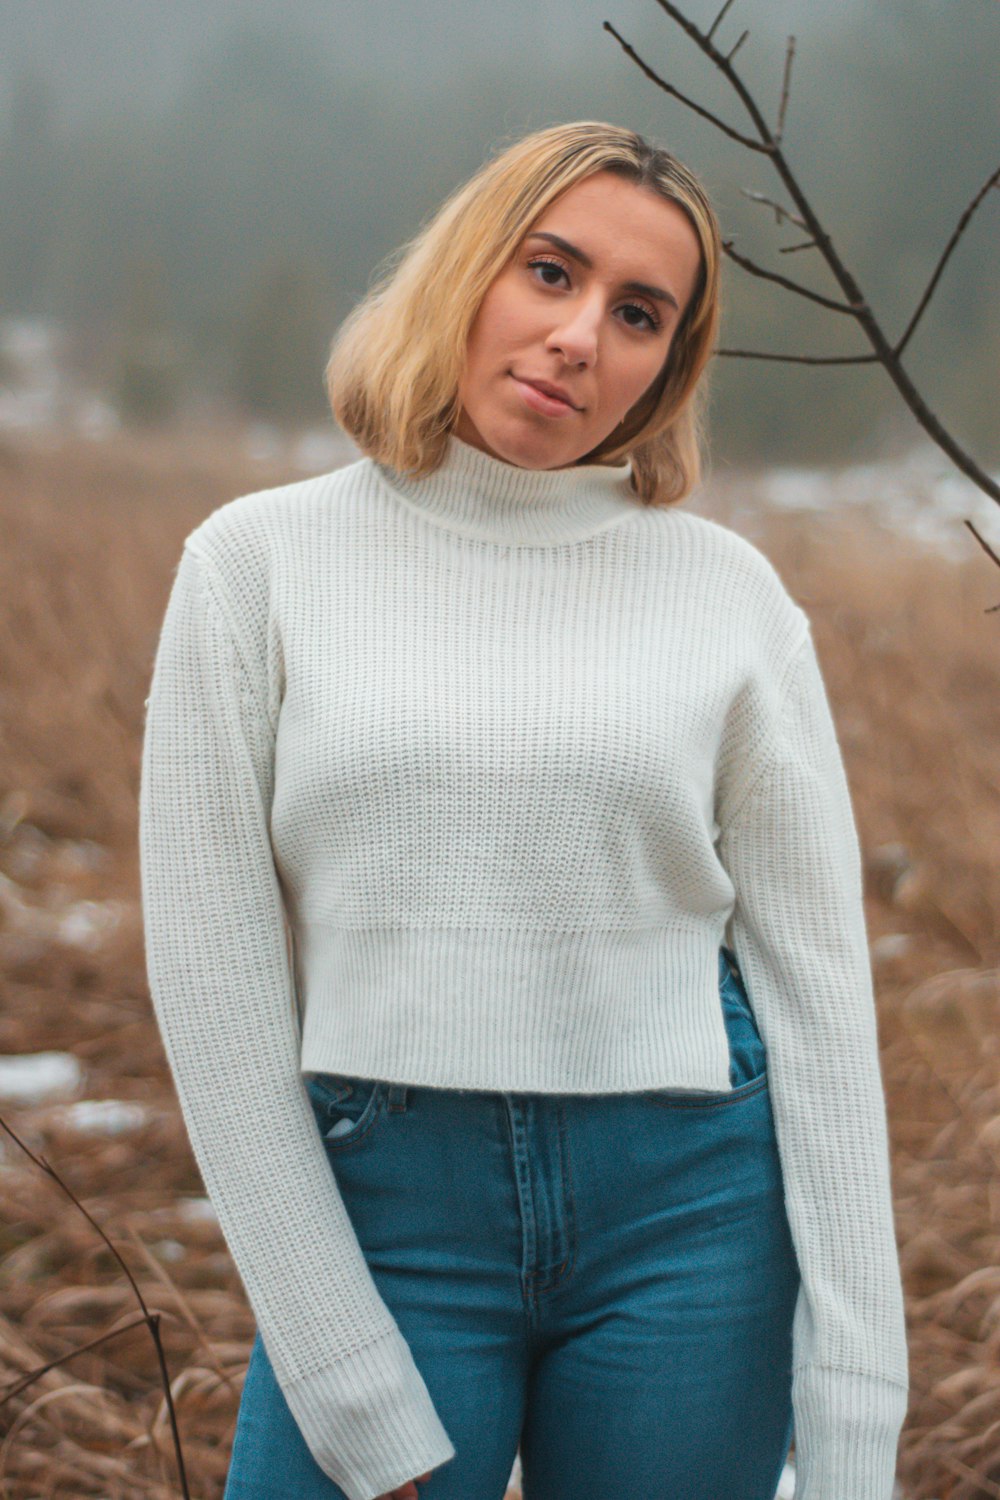 portrait photography of woman wearing white sweater and blue denim jeans  photo – Free Sweater Image on Unsplash